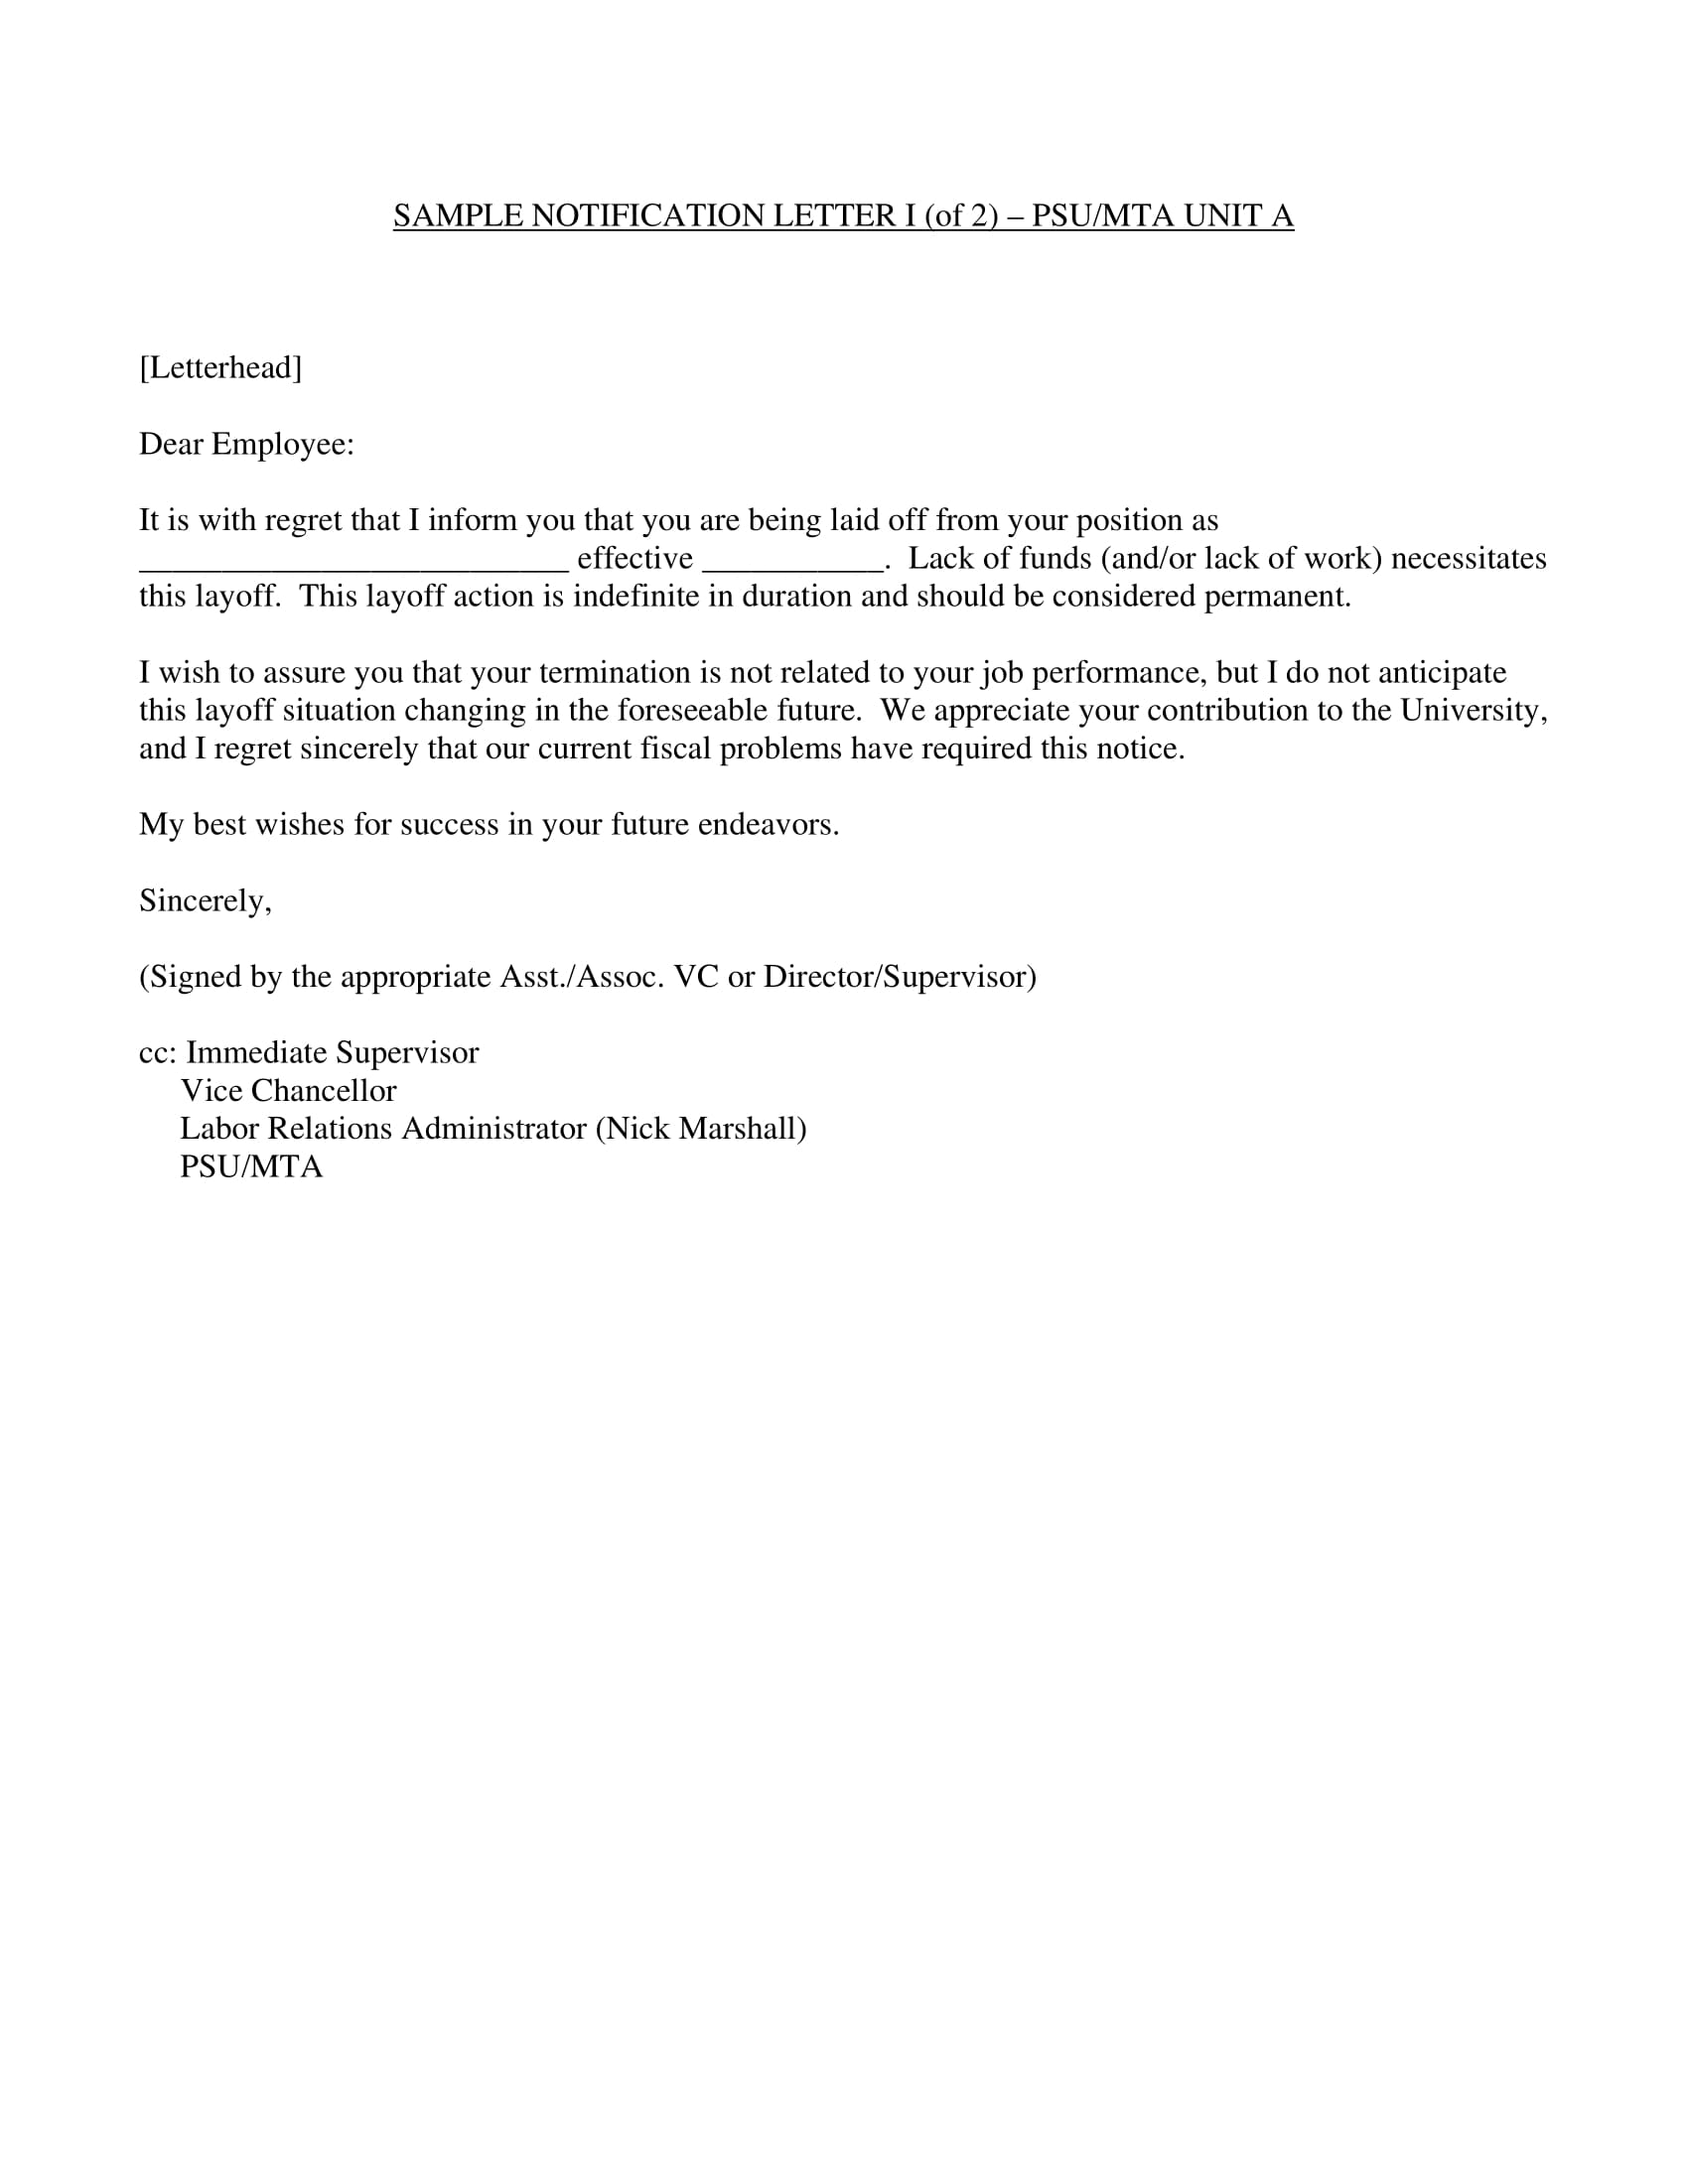 sample termination notification letter template